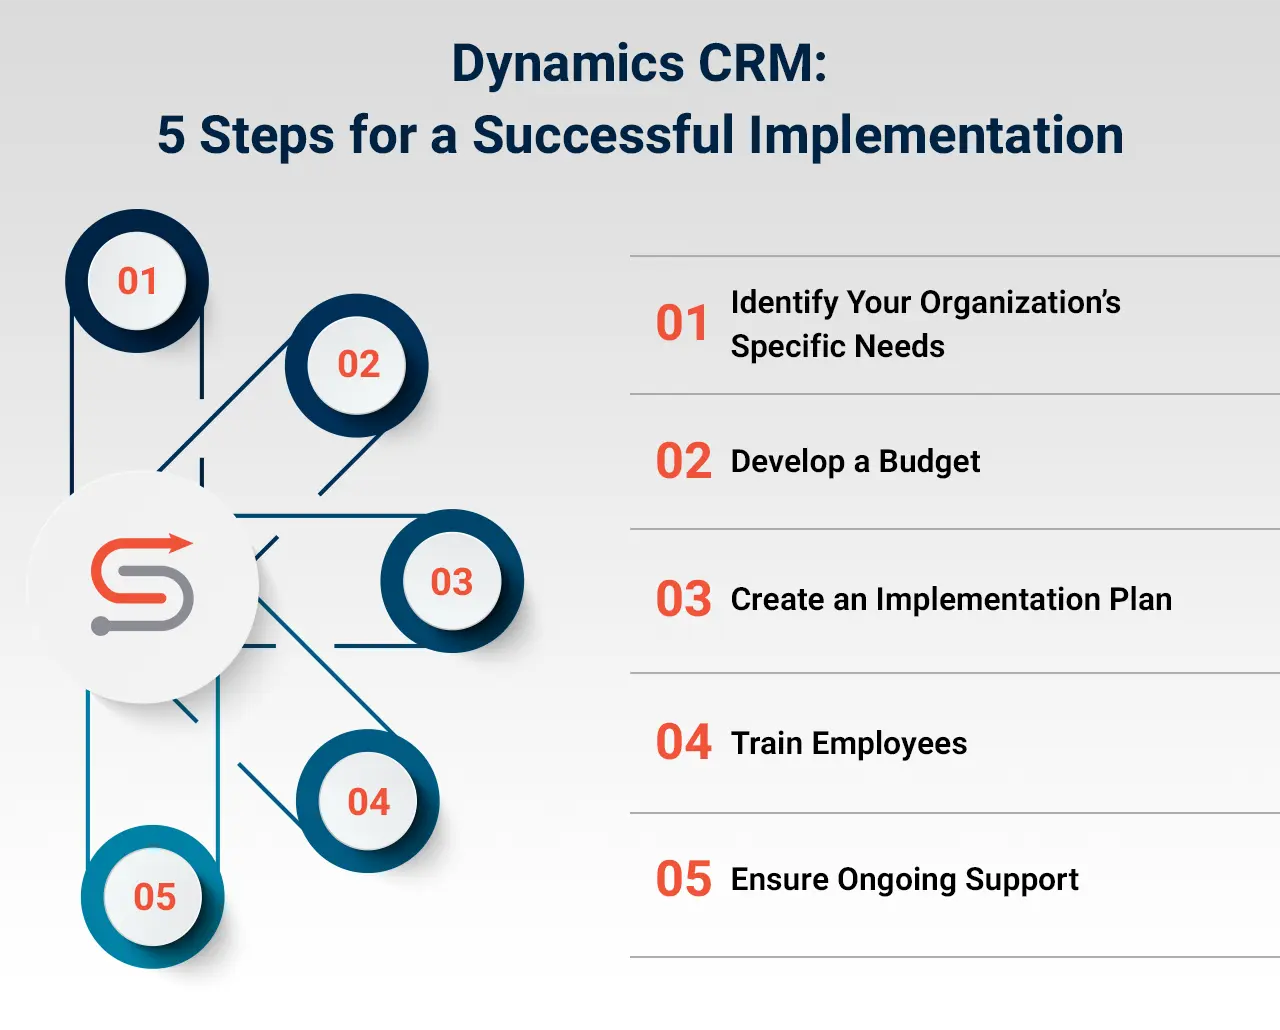 Dynamics CRM: 5 Steps for a Successful Implementation